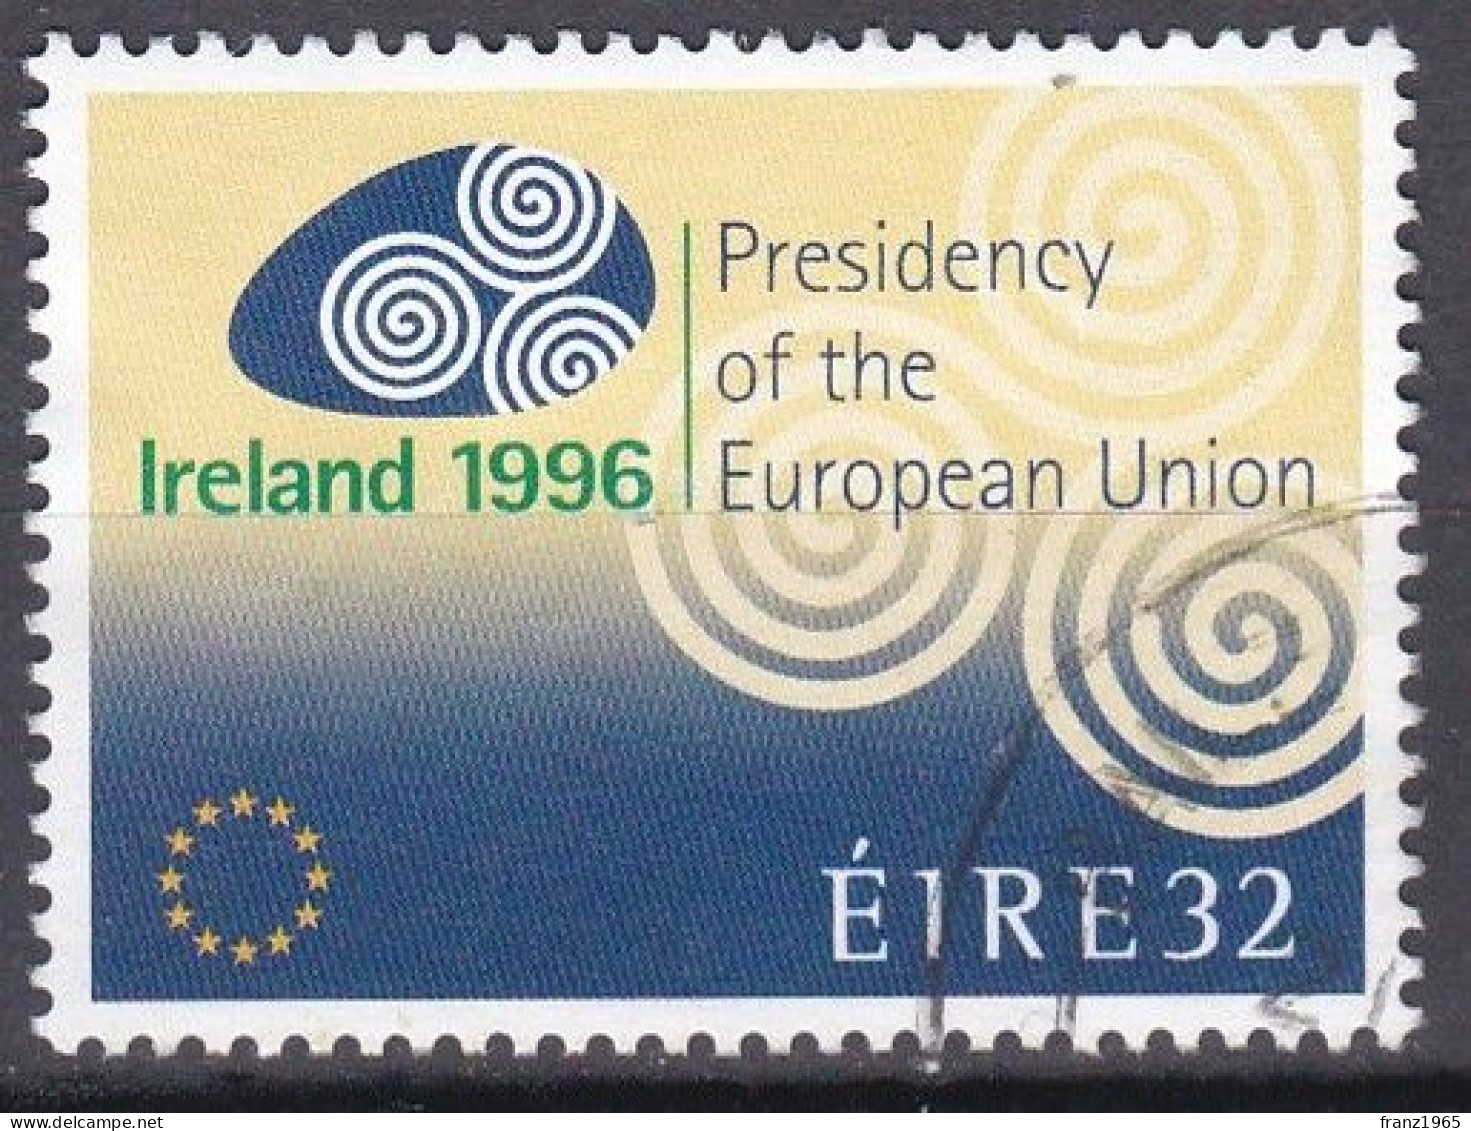 Presidency Of The European Union - 1996 - Used Stamps